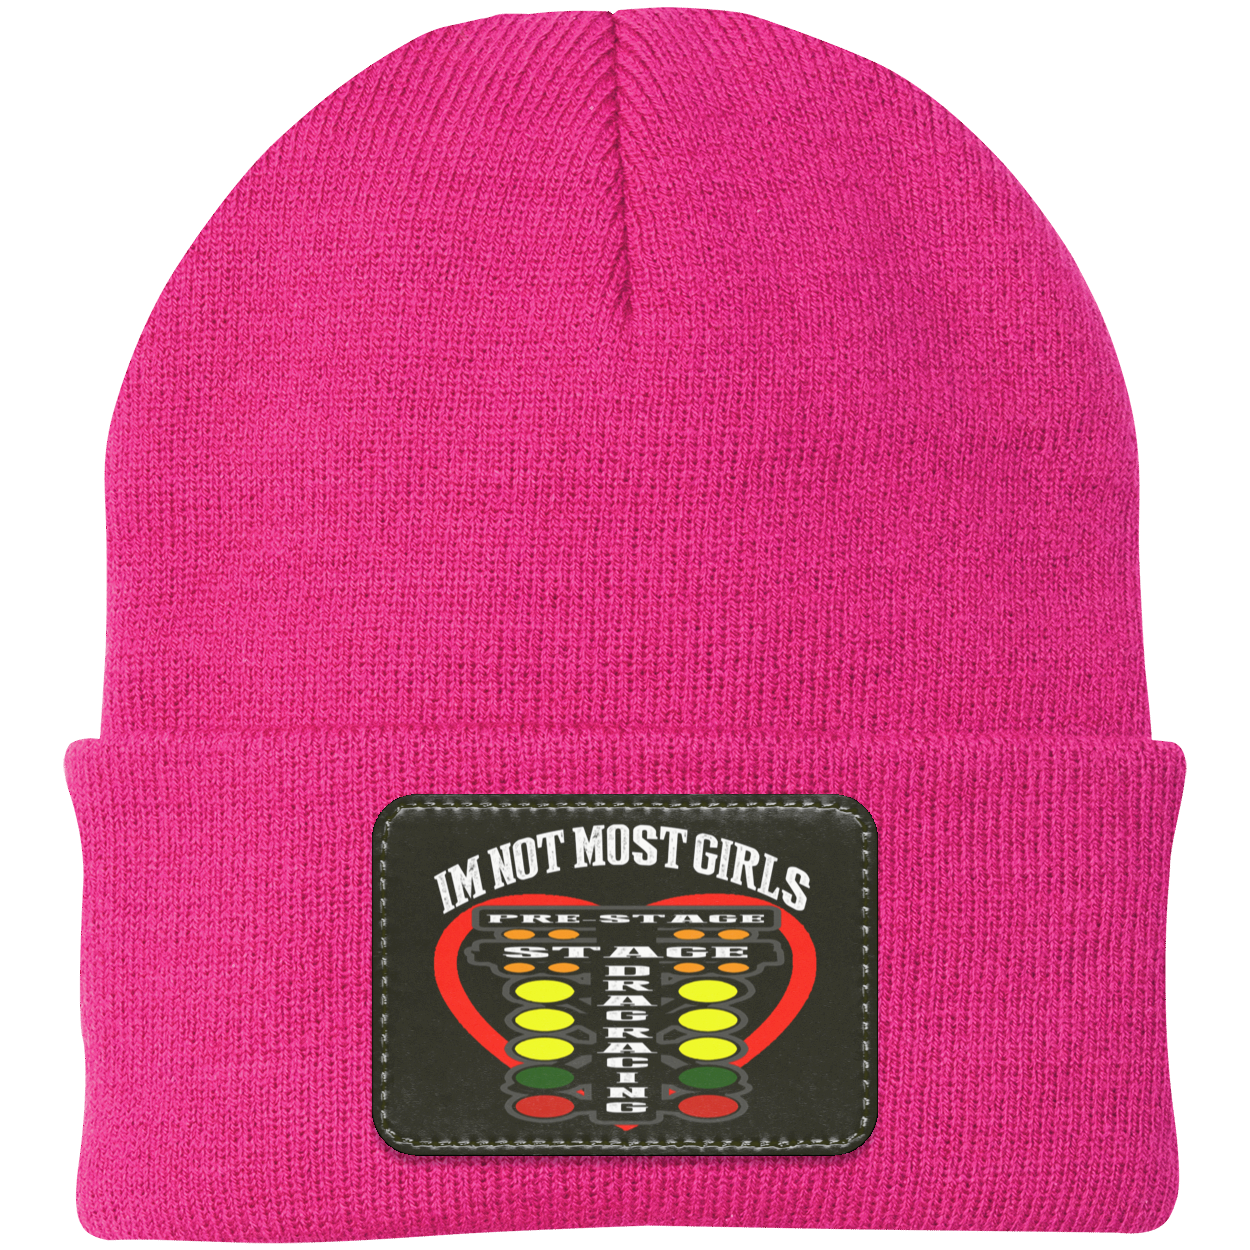 I'm Not Most Girls Drag Racing Knit Cap - Patch